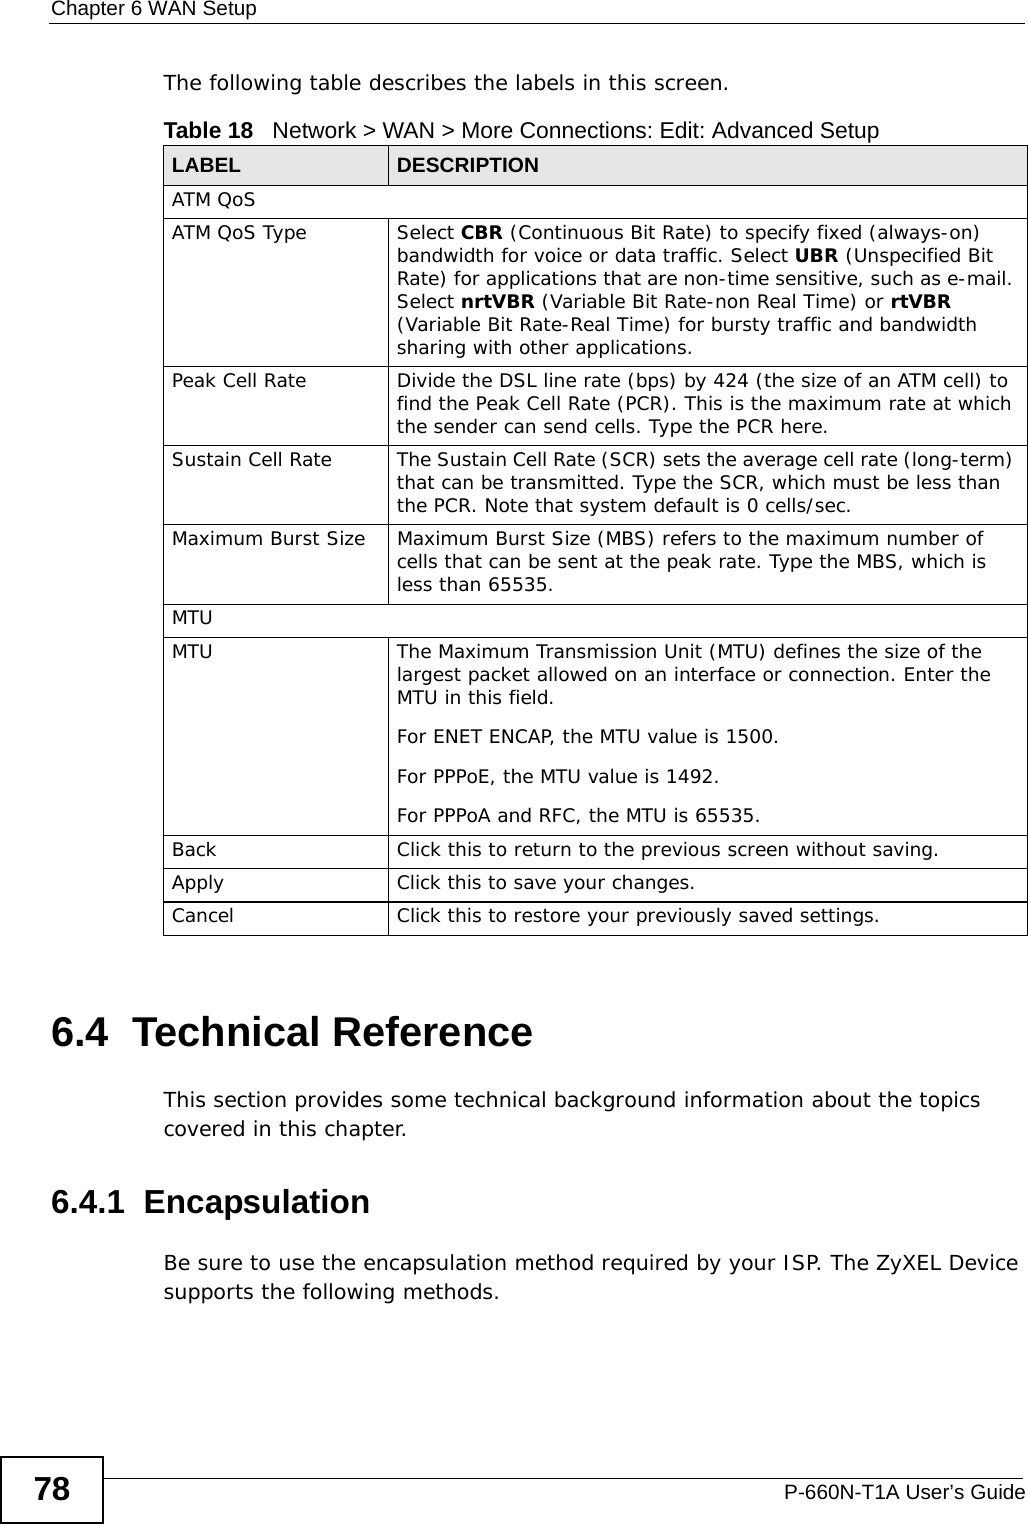 Chapter 6 WAN SetupP-660N-T1A User’s Guide78The following table describes the labels in this screen. 6.4  Technical ReferenceThis section provides some technical background information about the topics covered in this chapter.6.4.1  EncapsulationBe sure to use the encapsulation method required by your ISP. The ZyXEL Device supports the following methods.Table 18   Network &gt; WAN &gt; More Connections: Edit: Advanced SetupLABEL DESCRIPTIONATM QoSATM QoS Type Select CBR (Continuous Bit Rate) to specify fixed (always-on) bandwidth for voice or data traffic. Select UBR (Unspecified Bit Rate) for applications that are non-time sensitive, such as e-mail. Select nrtVBR (Variable Bit Rate-non Real Time) or rtVBR (Variable Bit Rate-Real Time) for bursty traffic and bandwidth sharing with other applications. Peak Cell Rate Divide the DSL line rate (bps) by 424 (the size of an ATM cell) to find the Peak Cell Rate (PCR). This is the maximum rate at which the sender can send cells. Type the PCR here.Sustain Cell Rate The Sustain Cell Rate (SCR) sets the average cell rate (long-term) that can be transmitted. Type the SCR, which must be less than the PCR. Note that system default is 0 cells/sec. Maximum Burst Size Maximum Burst Size (MBS) refers to the maximum number of cells that can be sent at the peak rate. Type the MBS, which is less than 65535. MTUMTU The Maximum Transmission Unit (MTU) defines the size of the largest packet allowed on an interface or connection. Enter the MTU in this field.For ENET ENCAP, the MTU value is 1500.For PPPoE, the MTU value is 1492.For PPPoA and RFC, the MTU is 65535.Back Click this to return to the previous screen without saving.Apply Click this to save your changes. Cancel Click this to restore your previously saved settings.